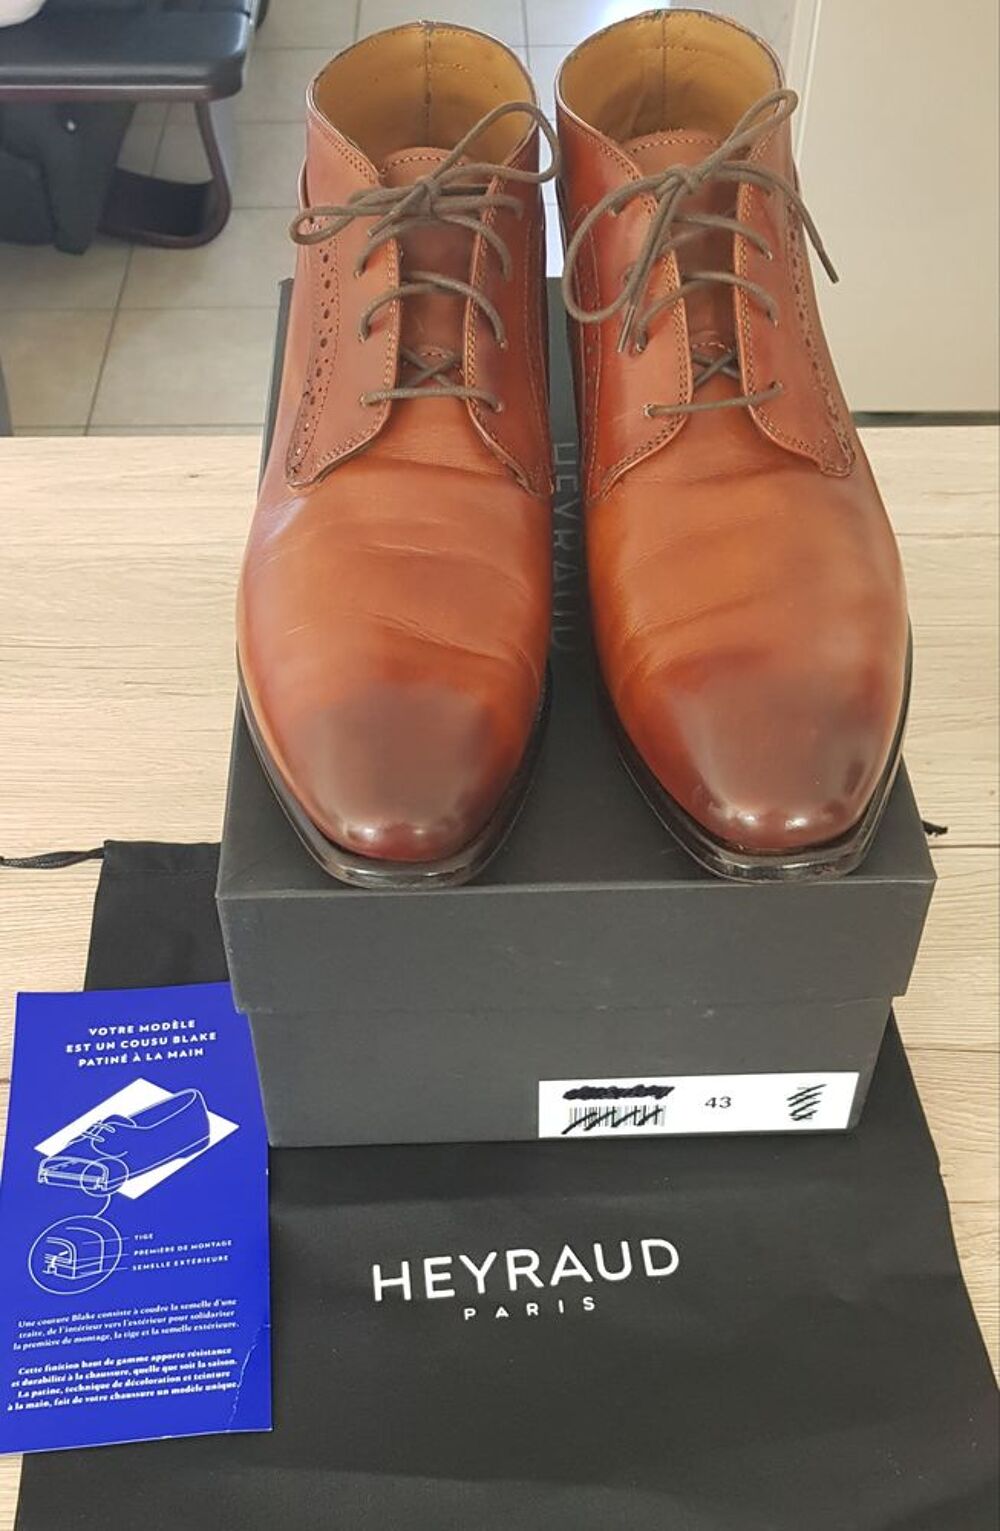 Chaussures en cuir marron pour homme marque Heyraud Chaussures